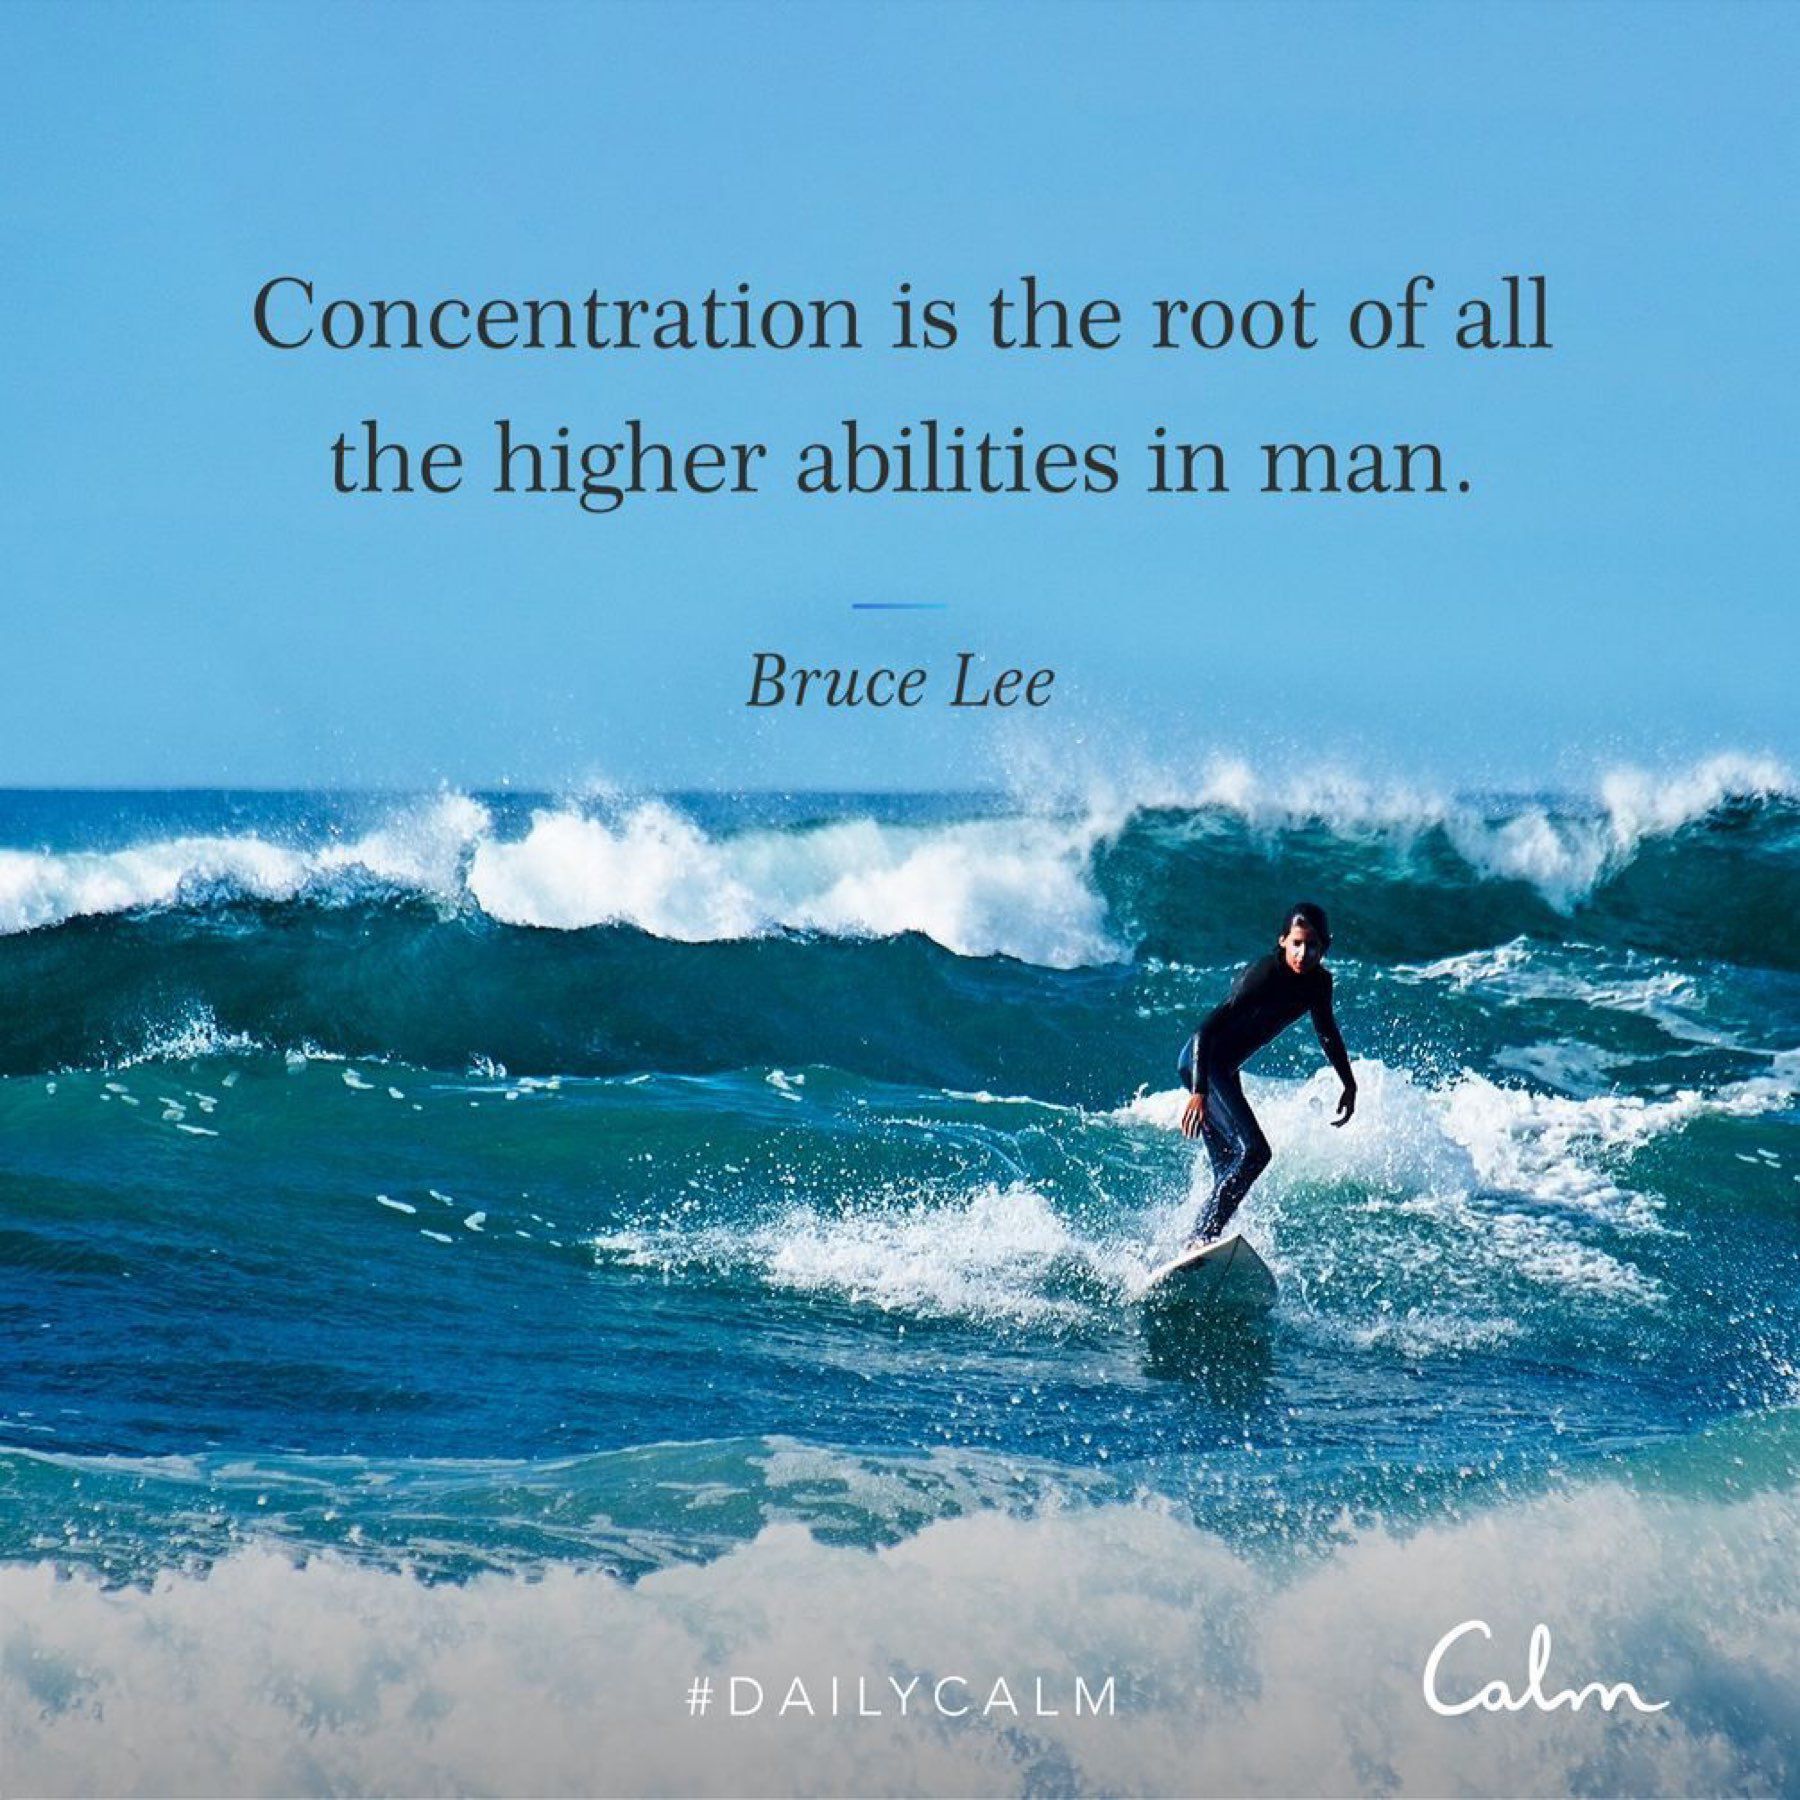 Concentration is the root